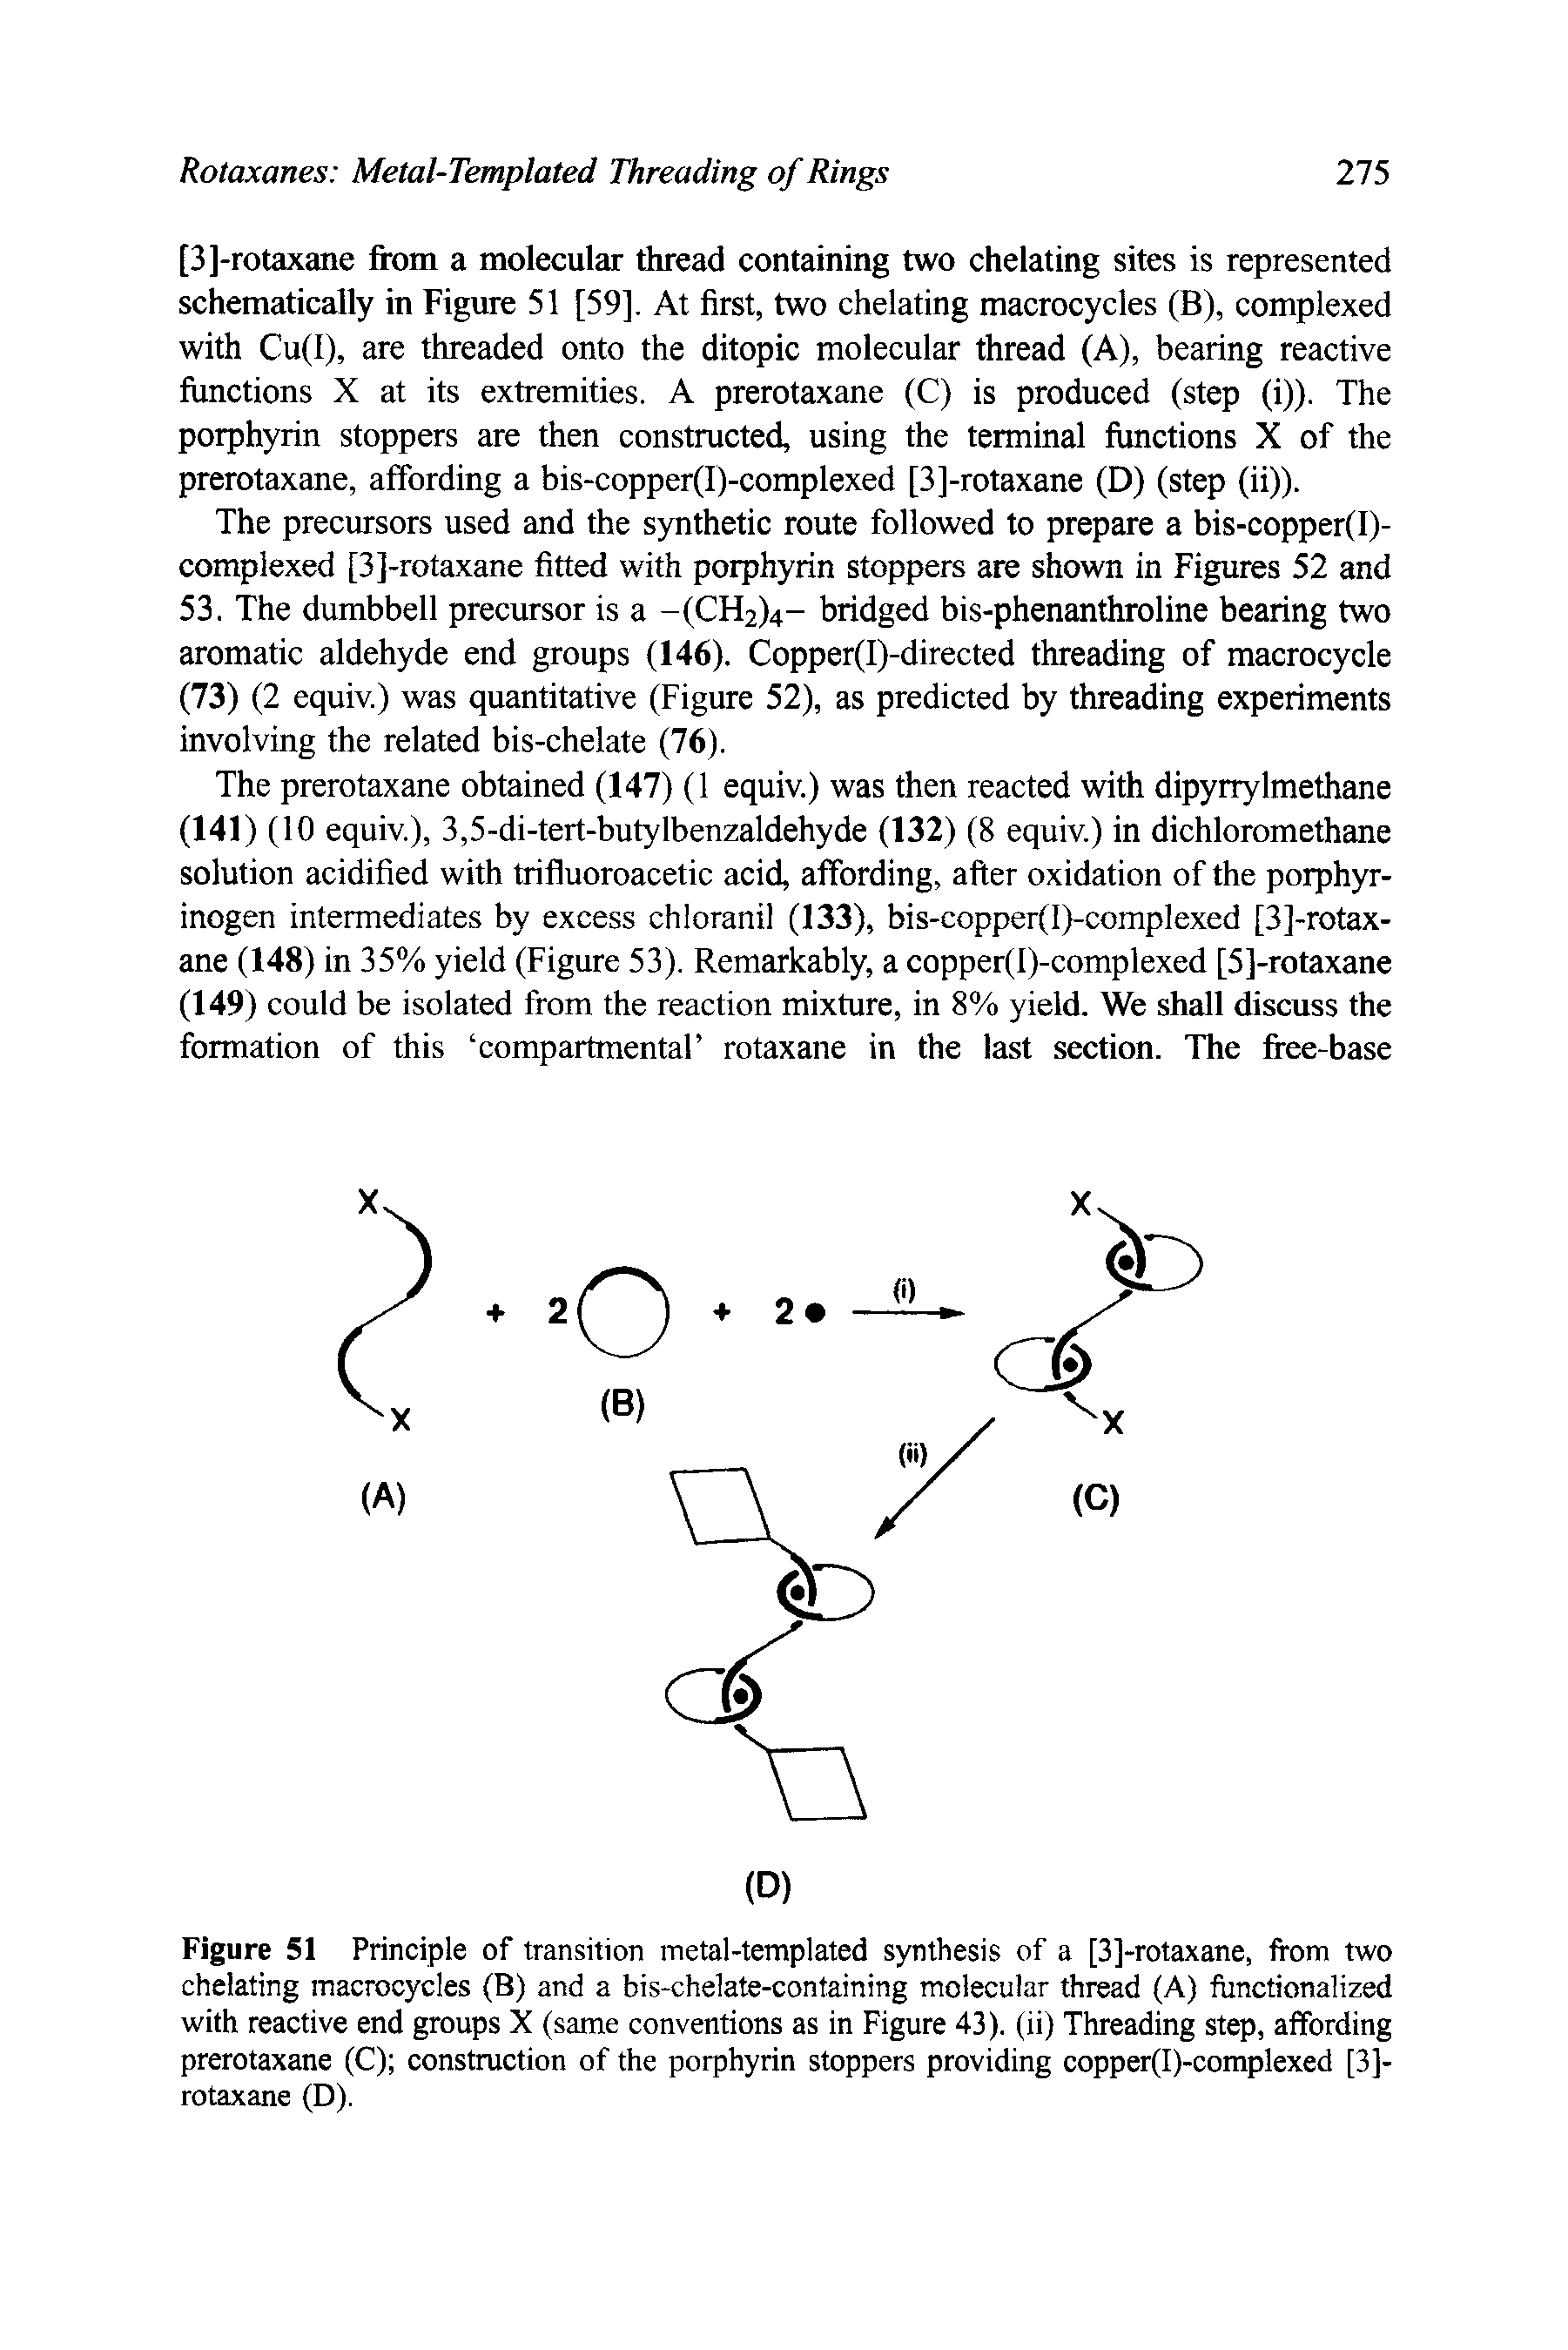 Figure 51 Principle of transition metal-templated synthesis of a [3]-rotaxane, from two chelating macrocycles (B) and a bis-chelate-containing molecular thread (A) functionalized with reactive end groups X (same conventions as in Figure 43). (ii) Threading step, affording prerotaxane (C) construction of the porphyrin stoppers providing copper(I)-complexed [3]-rotaxane (D).